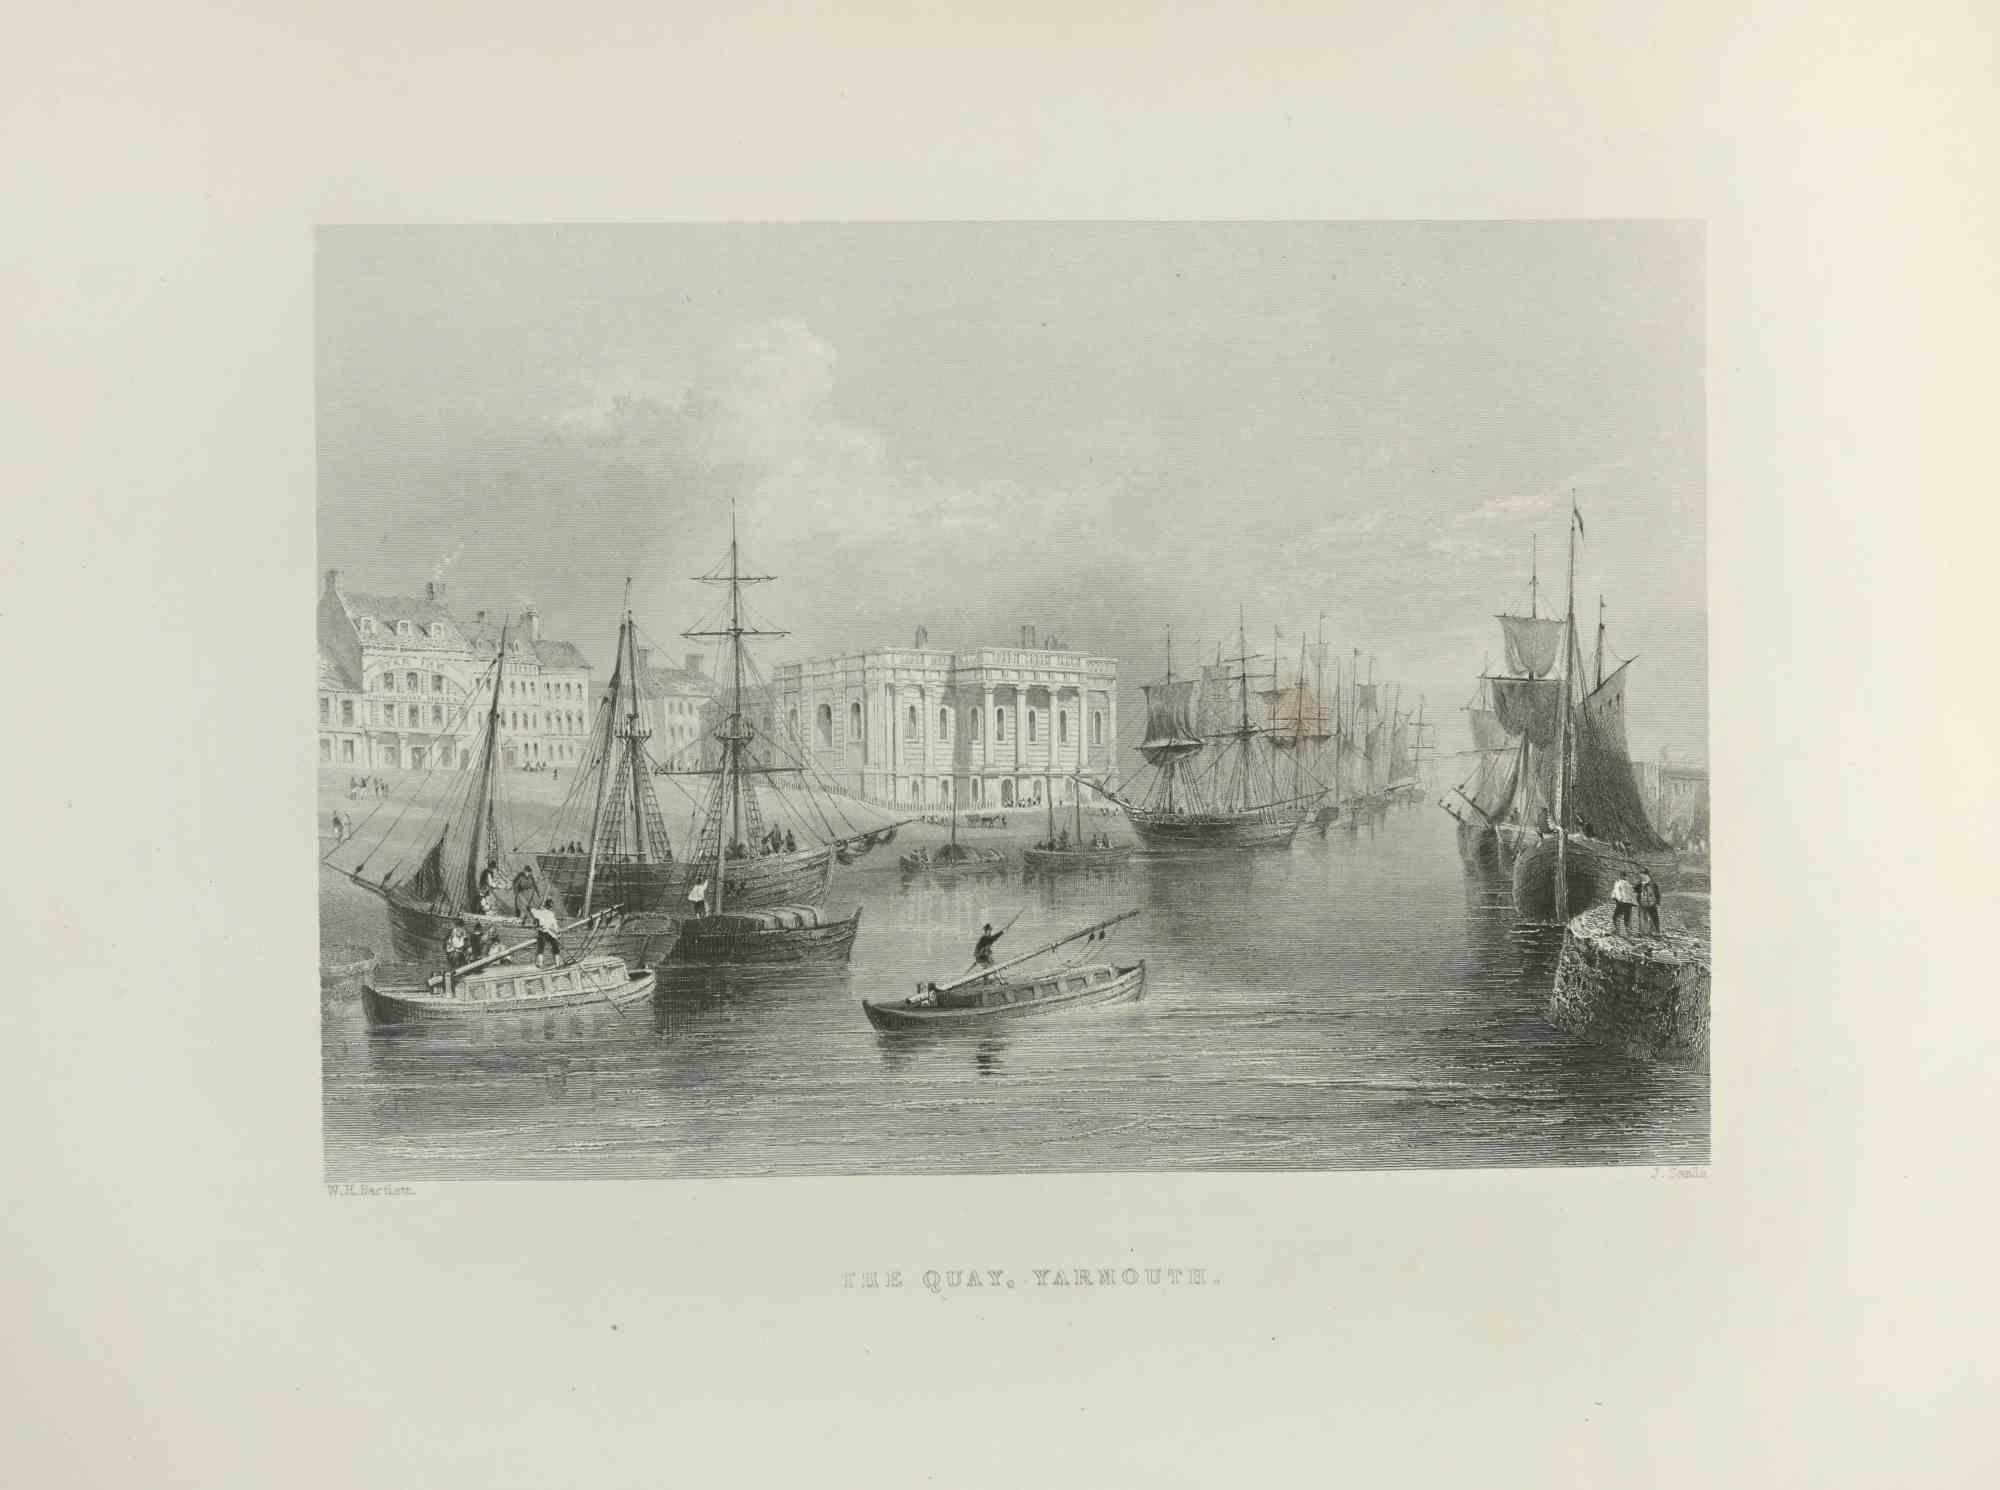 The Quay, Yarmouth - Engraving  by Edward Frencis Finden - 1845